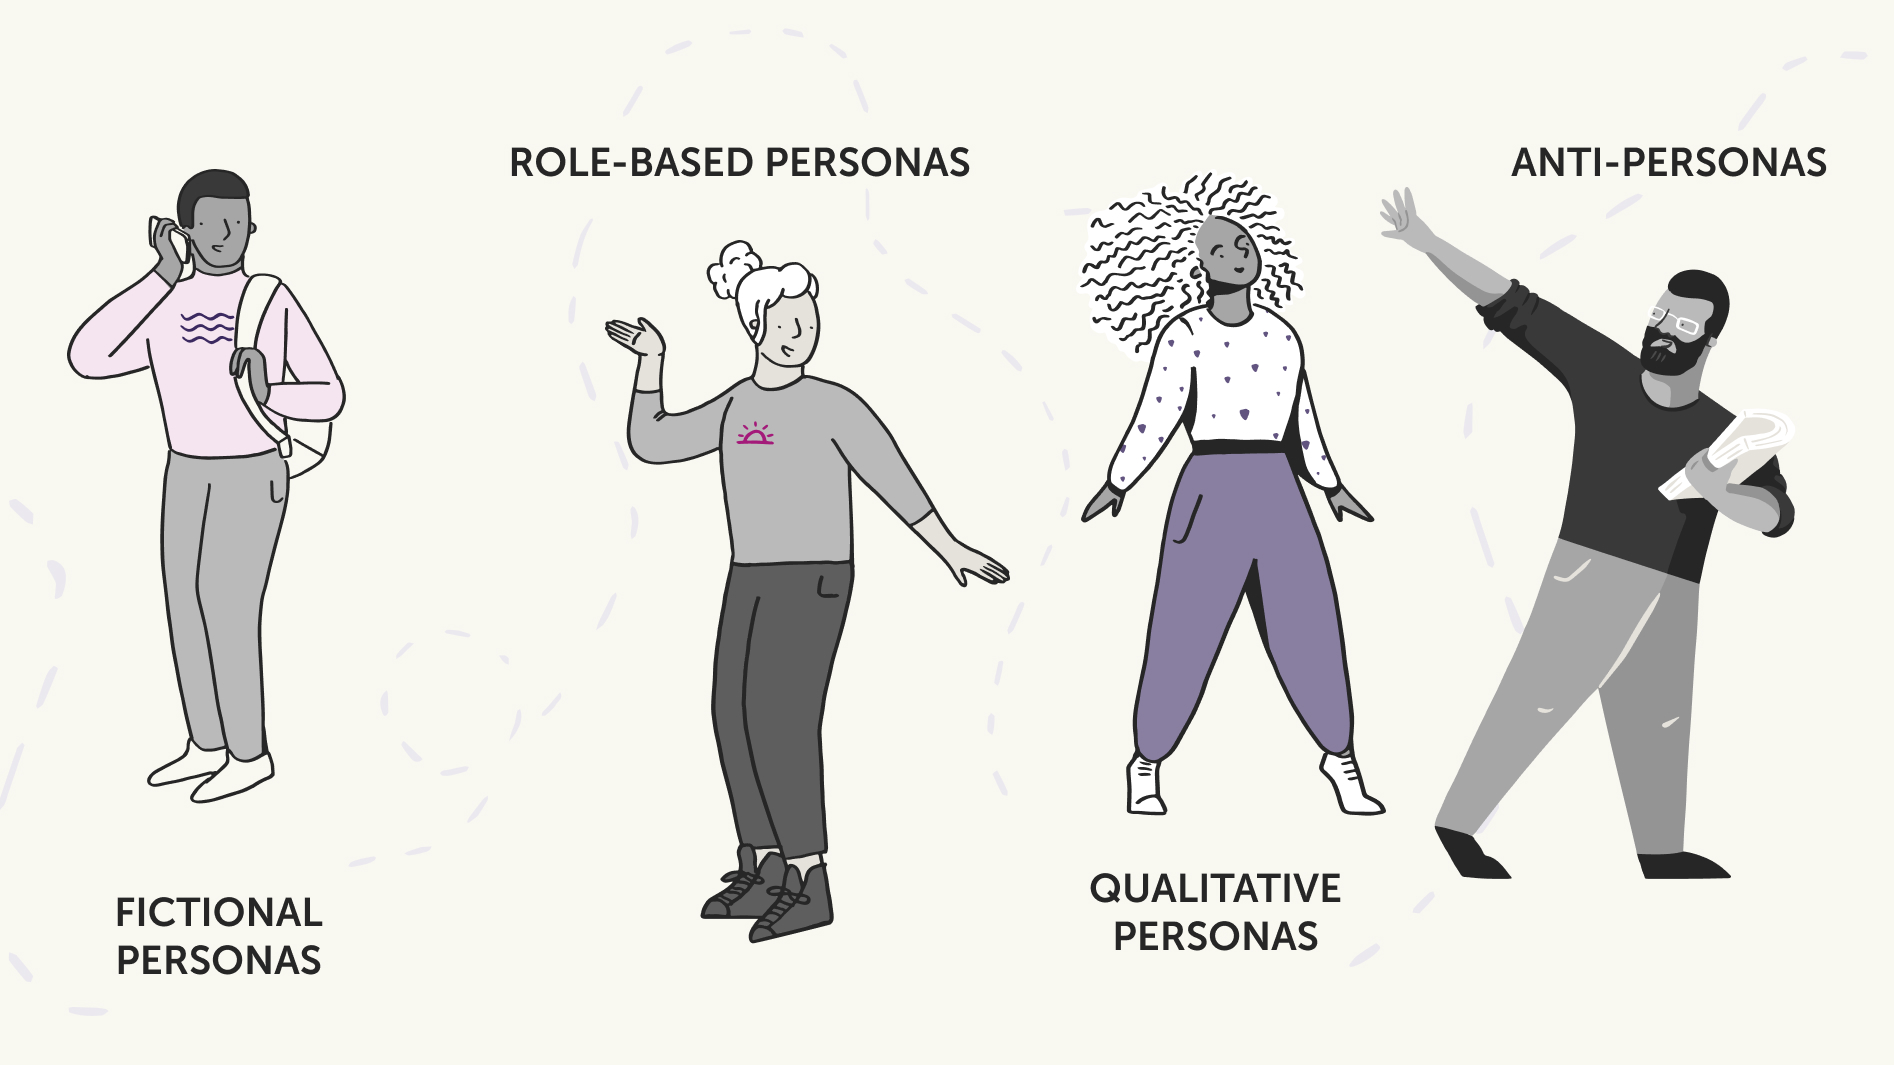 An infographic showcasing different types of personas in user experience design. On the left, under the label 'FICTIONAL PERSONAS', is an illustration of a person wearing headphones, a pink sweater, and grey pants, standing with a hand on their hip. In the center, titled 'ROLE-BASED PERSONAS', features a person waving, dressed in a grey sweater and grey pants. On the right, labeled 'ANTI-PERSONAS', is a person dancing energetically, in a black shirt and grey pants, with a beard and sunglasses, holding papers in one hand. The background is white with subtle blue scribbles.